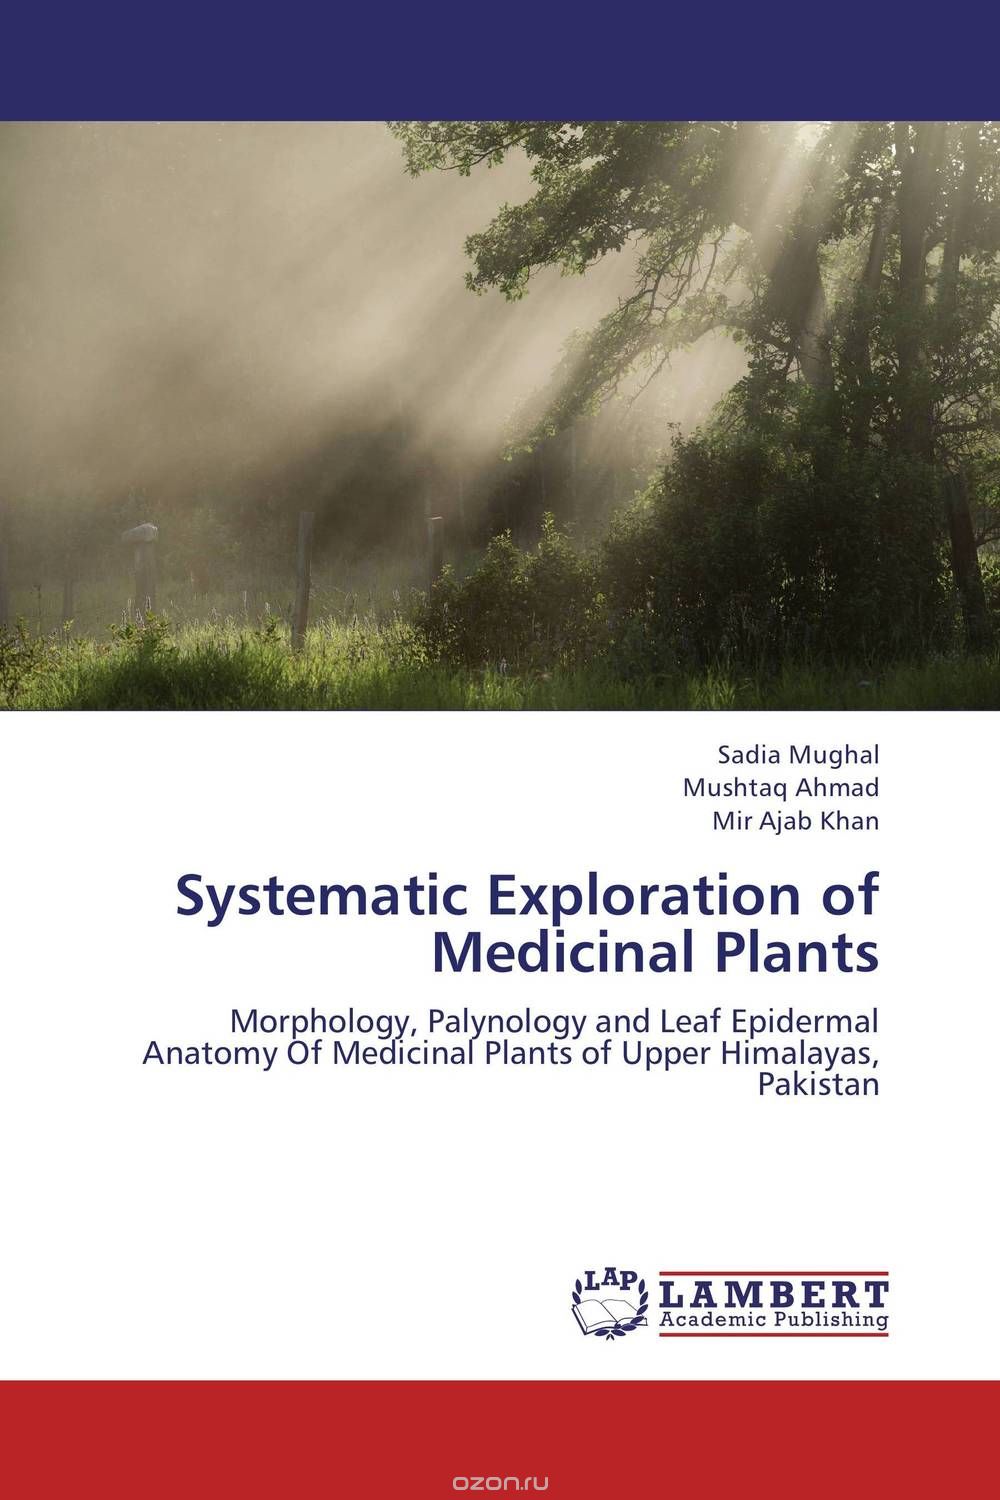 Systematic Exploration of Medicinal Plants